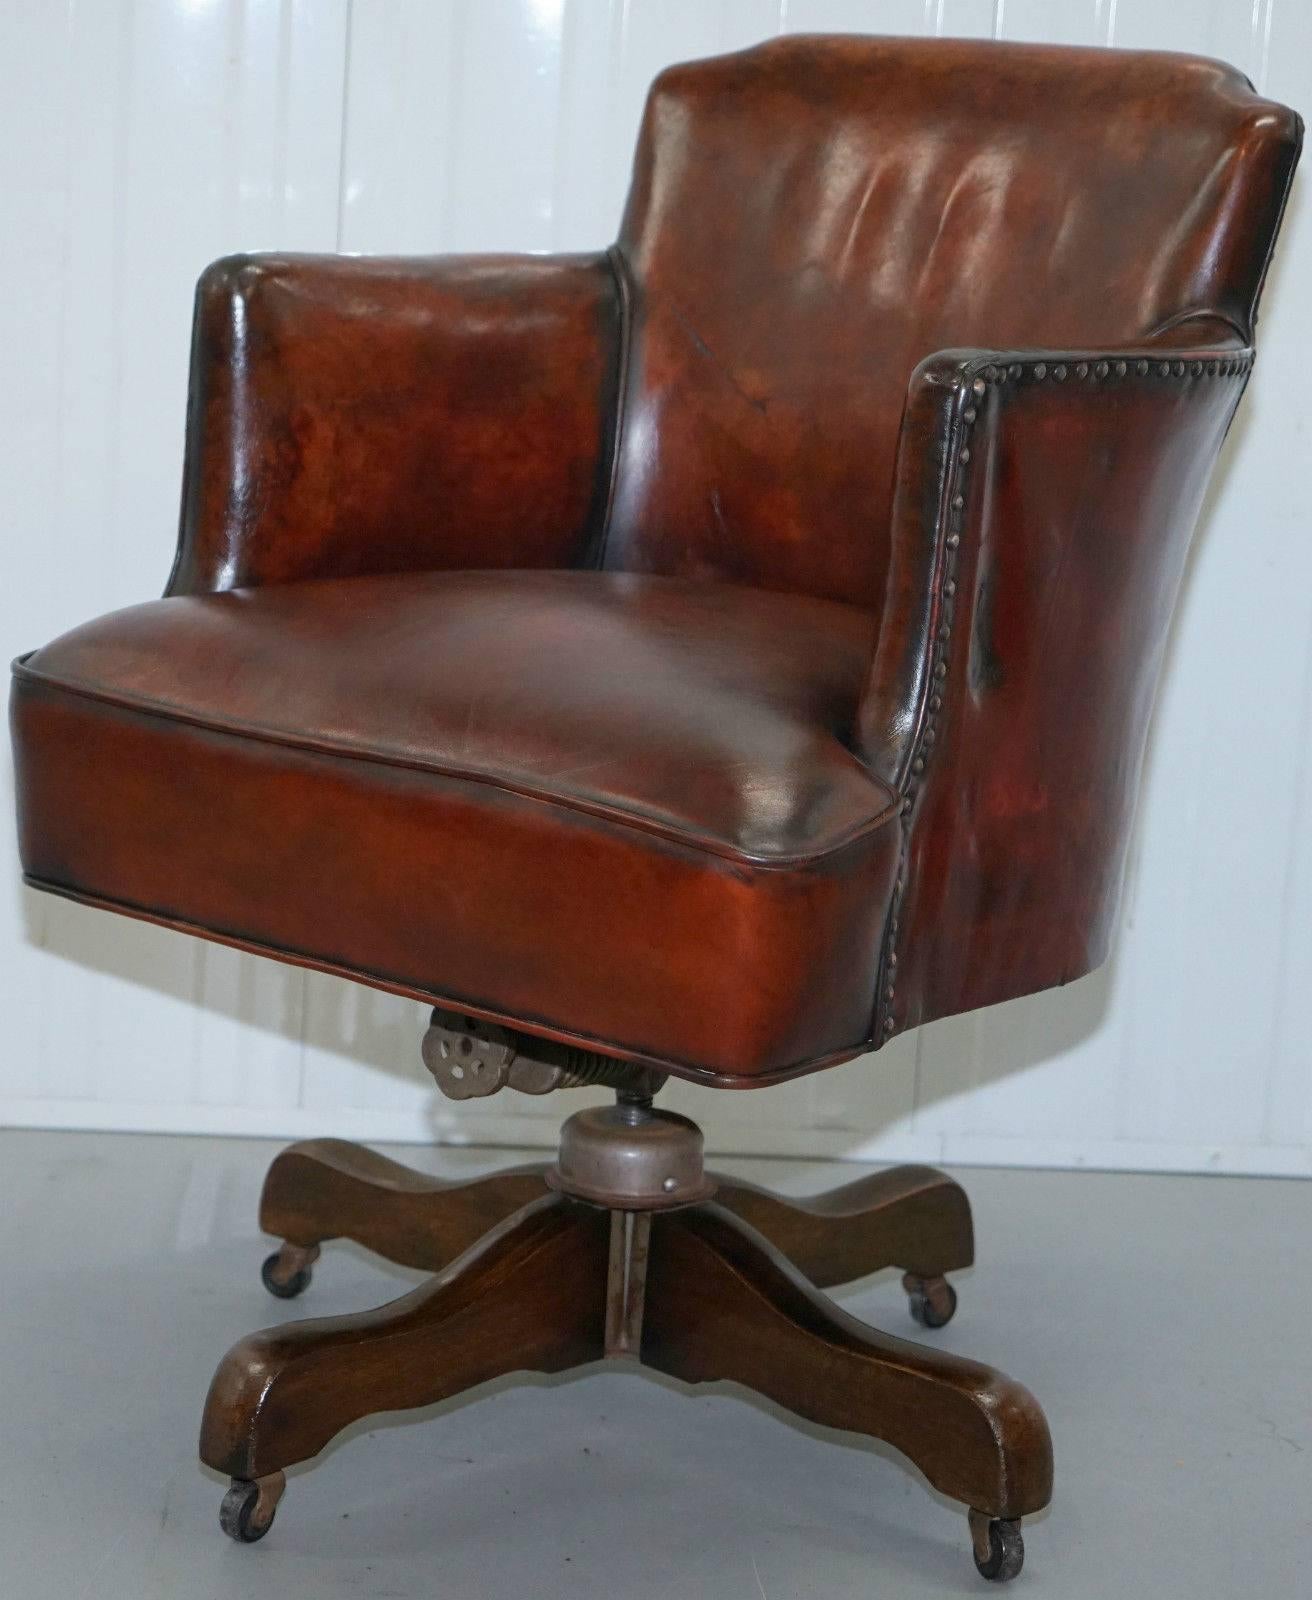 We are delighted to offer for sale this lovely fully restored Hillcrest original double tension spring 1920s horsehair padded with coil sprung base captains chair

This piece has been fully restored to include having the leather stripped back then